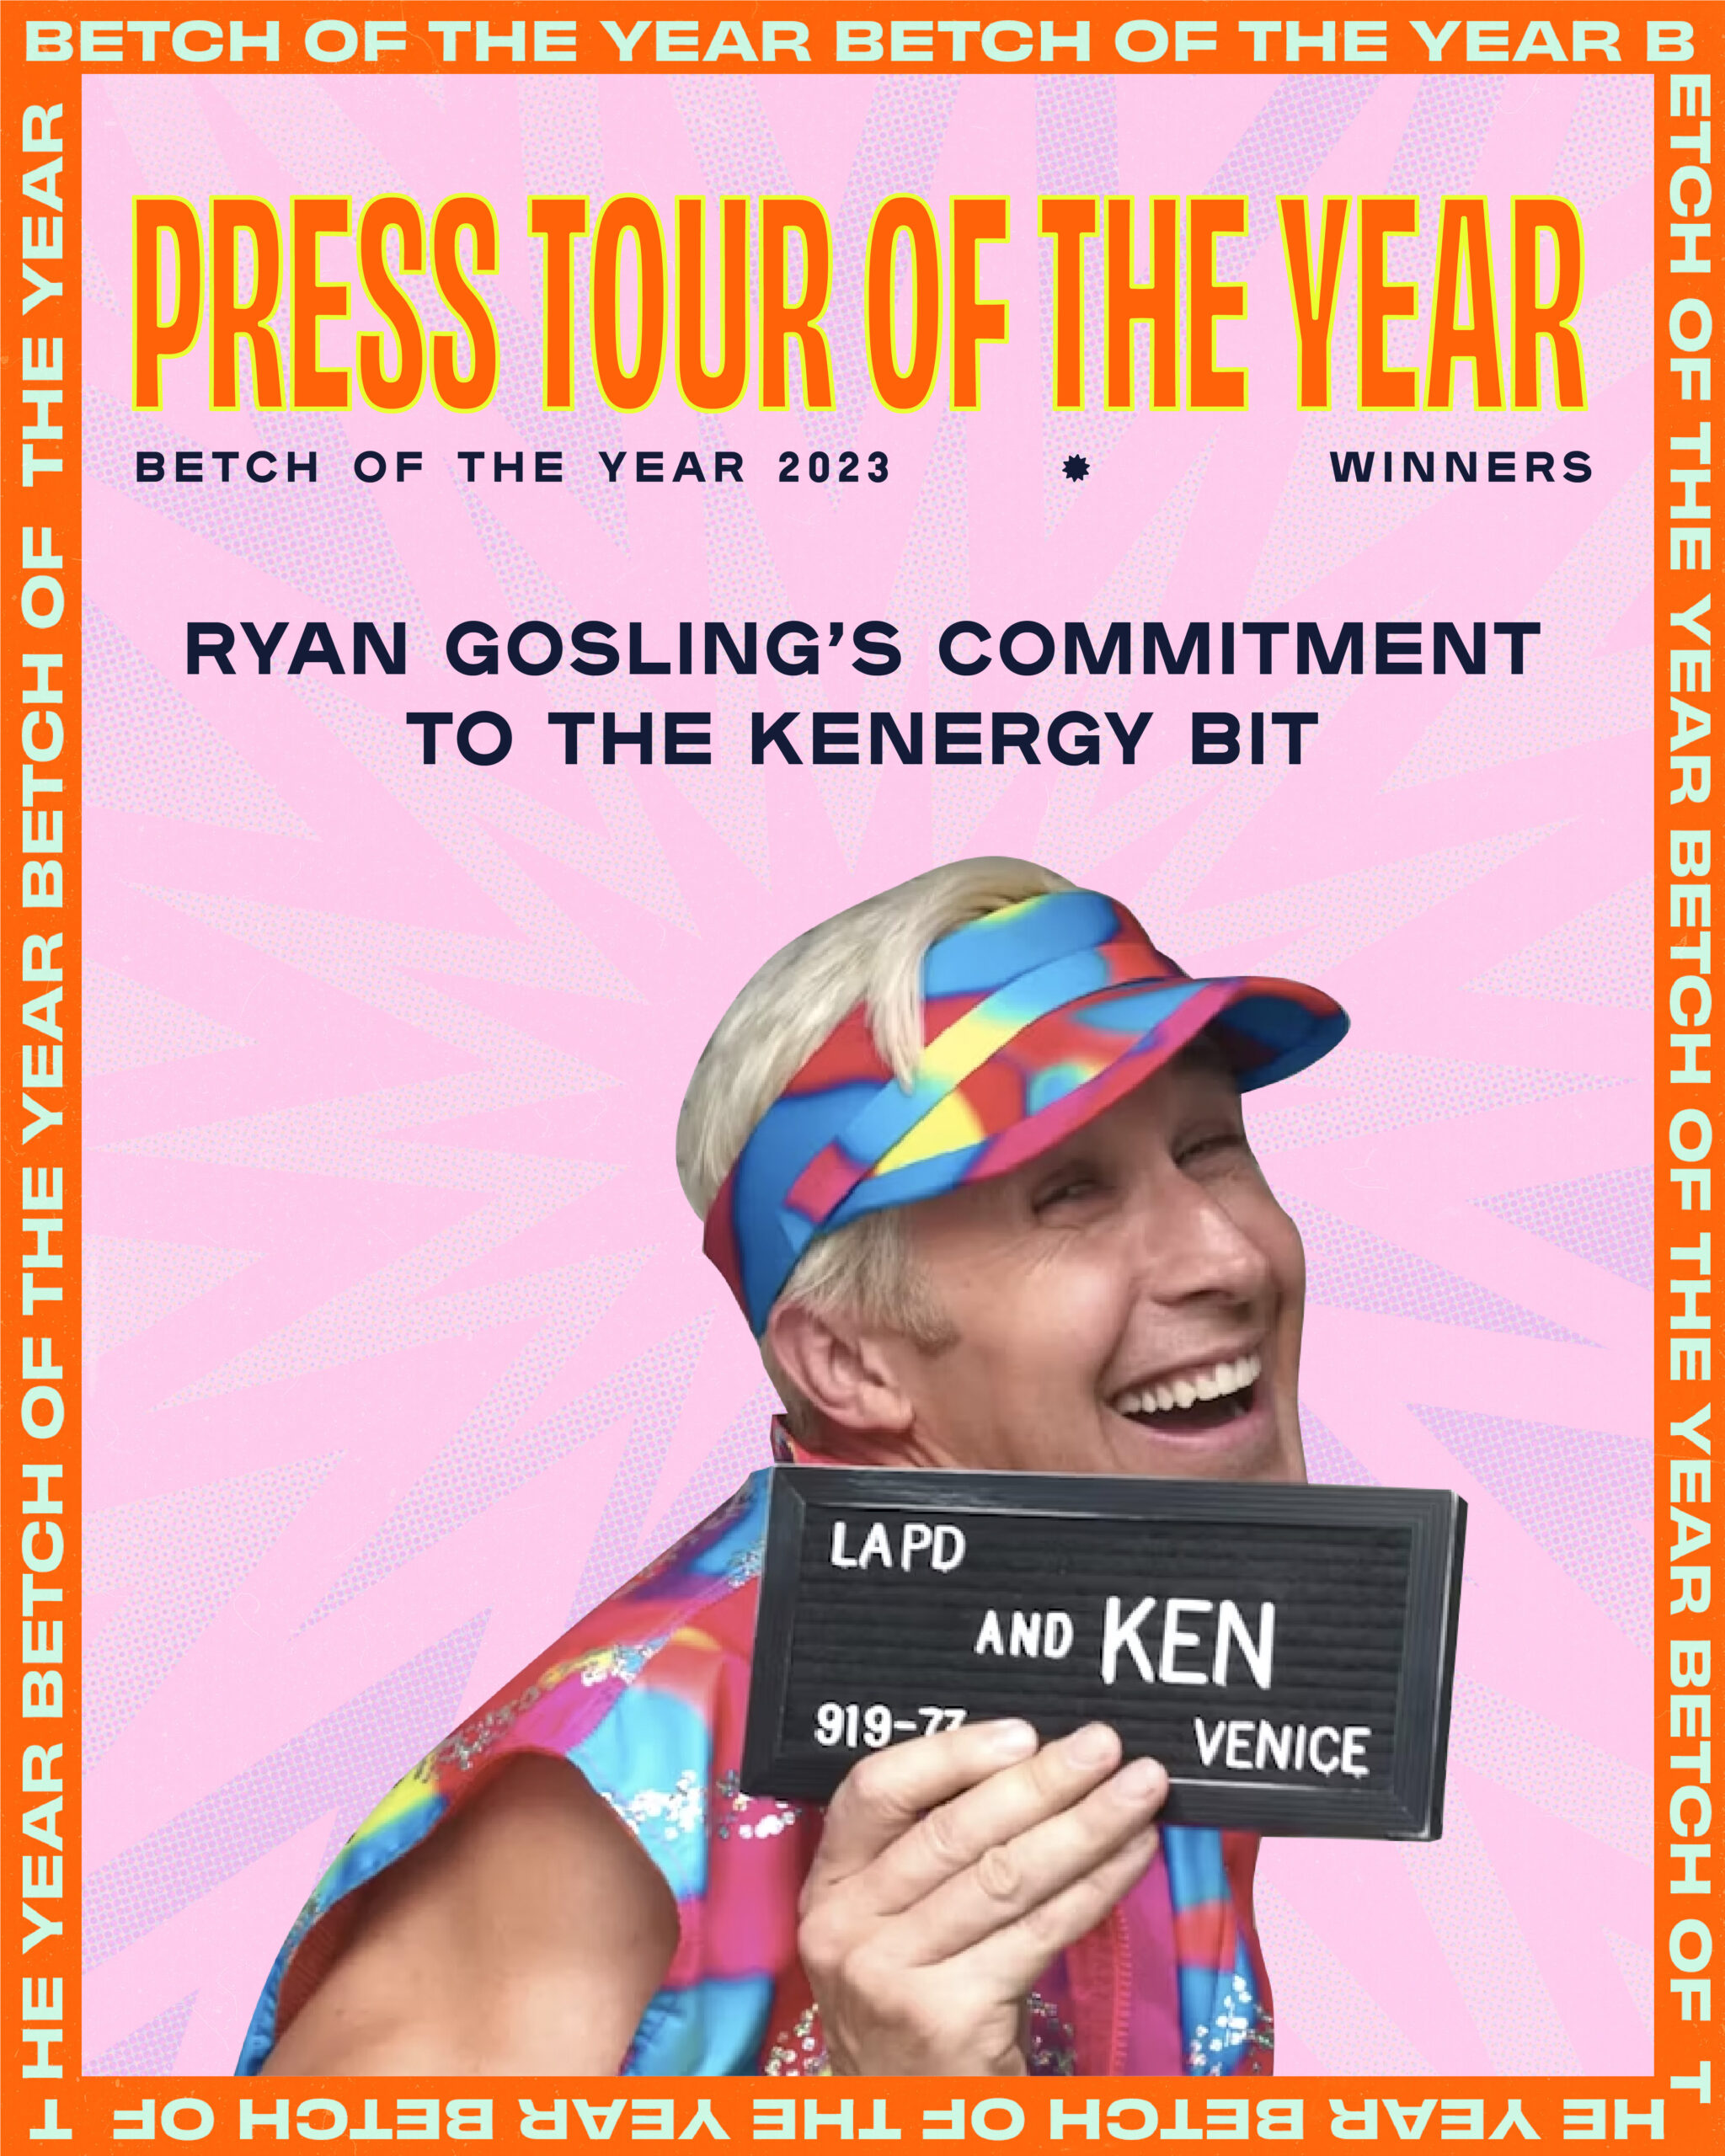 press-tour-of-the-year